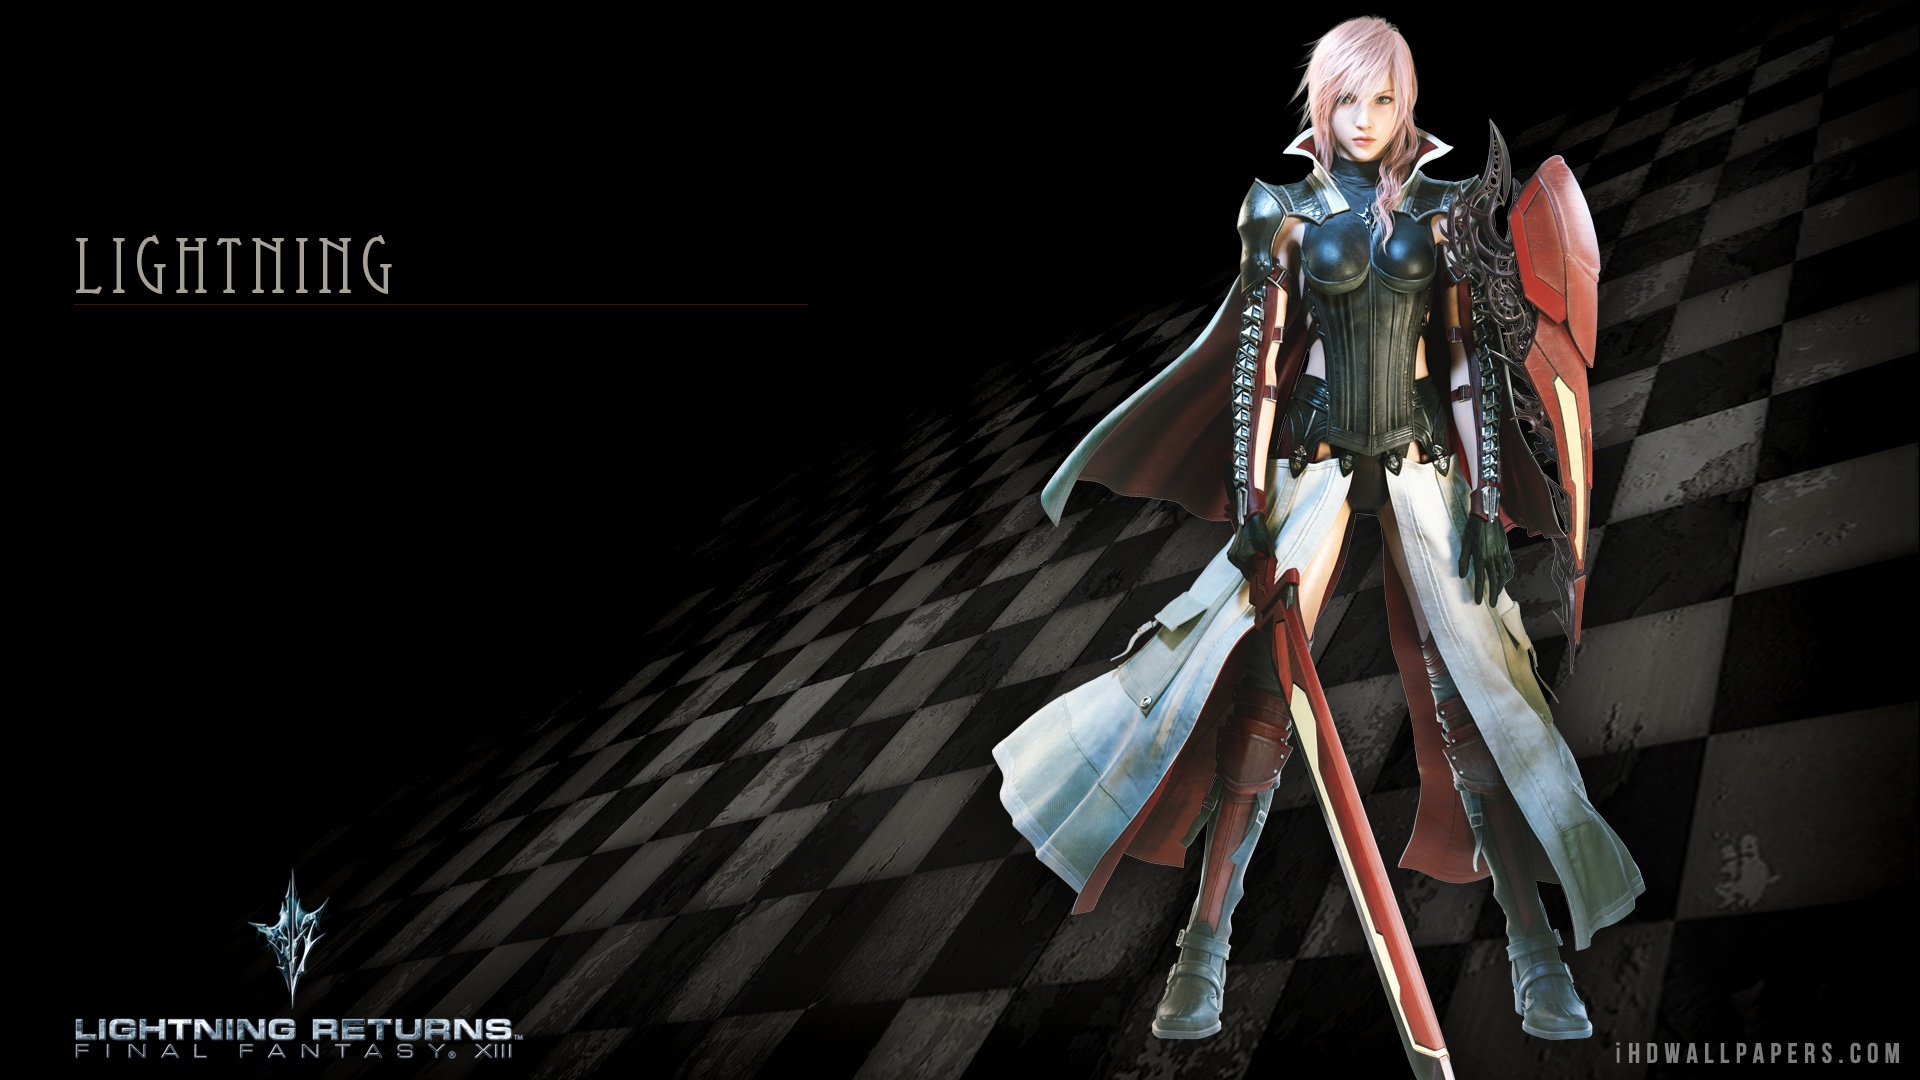 Download Lightning Returns Final Fantasy XIII wallpaper from the